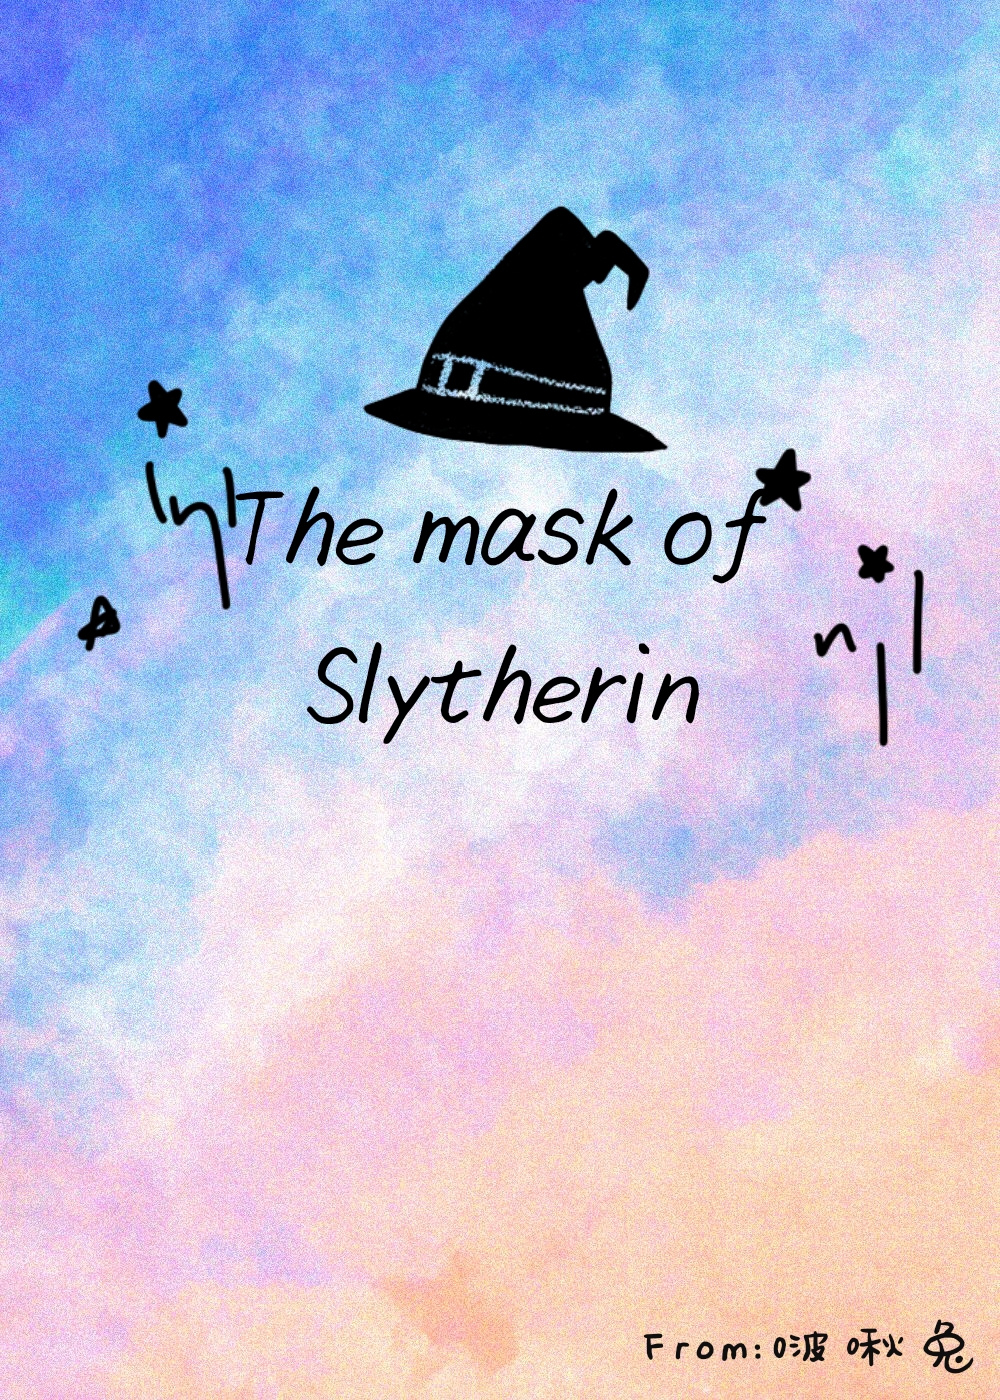 [HP] The mask of Slytherin